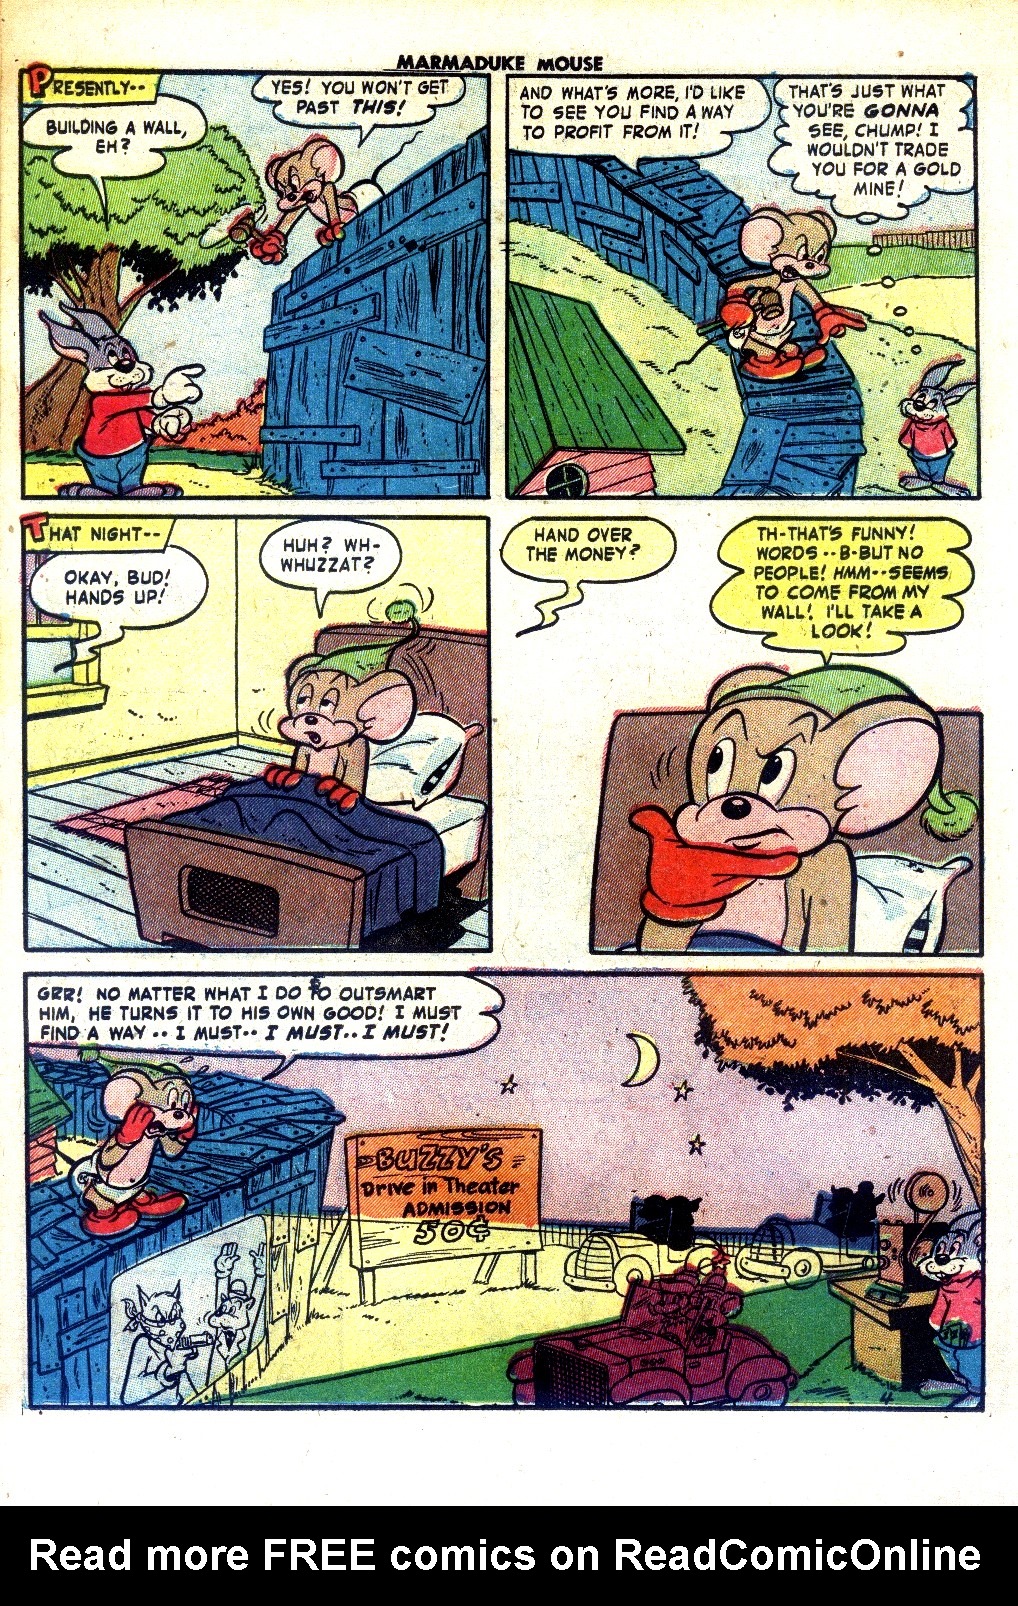 Read online Marmaduke Mouse comic -  Issue #40 - 22